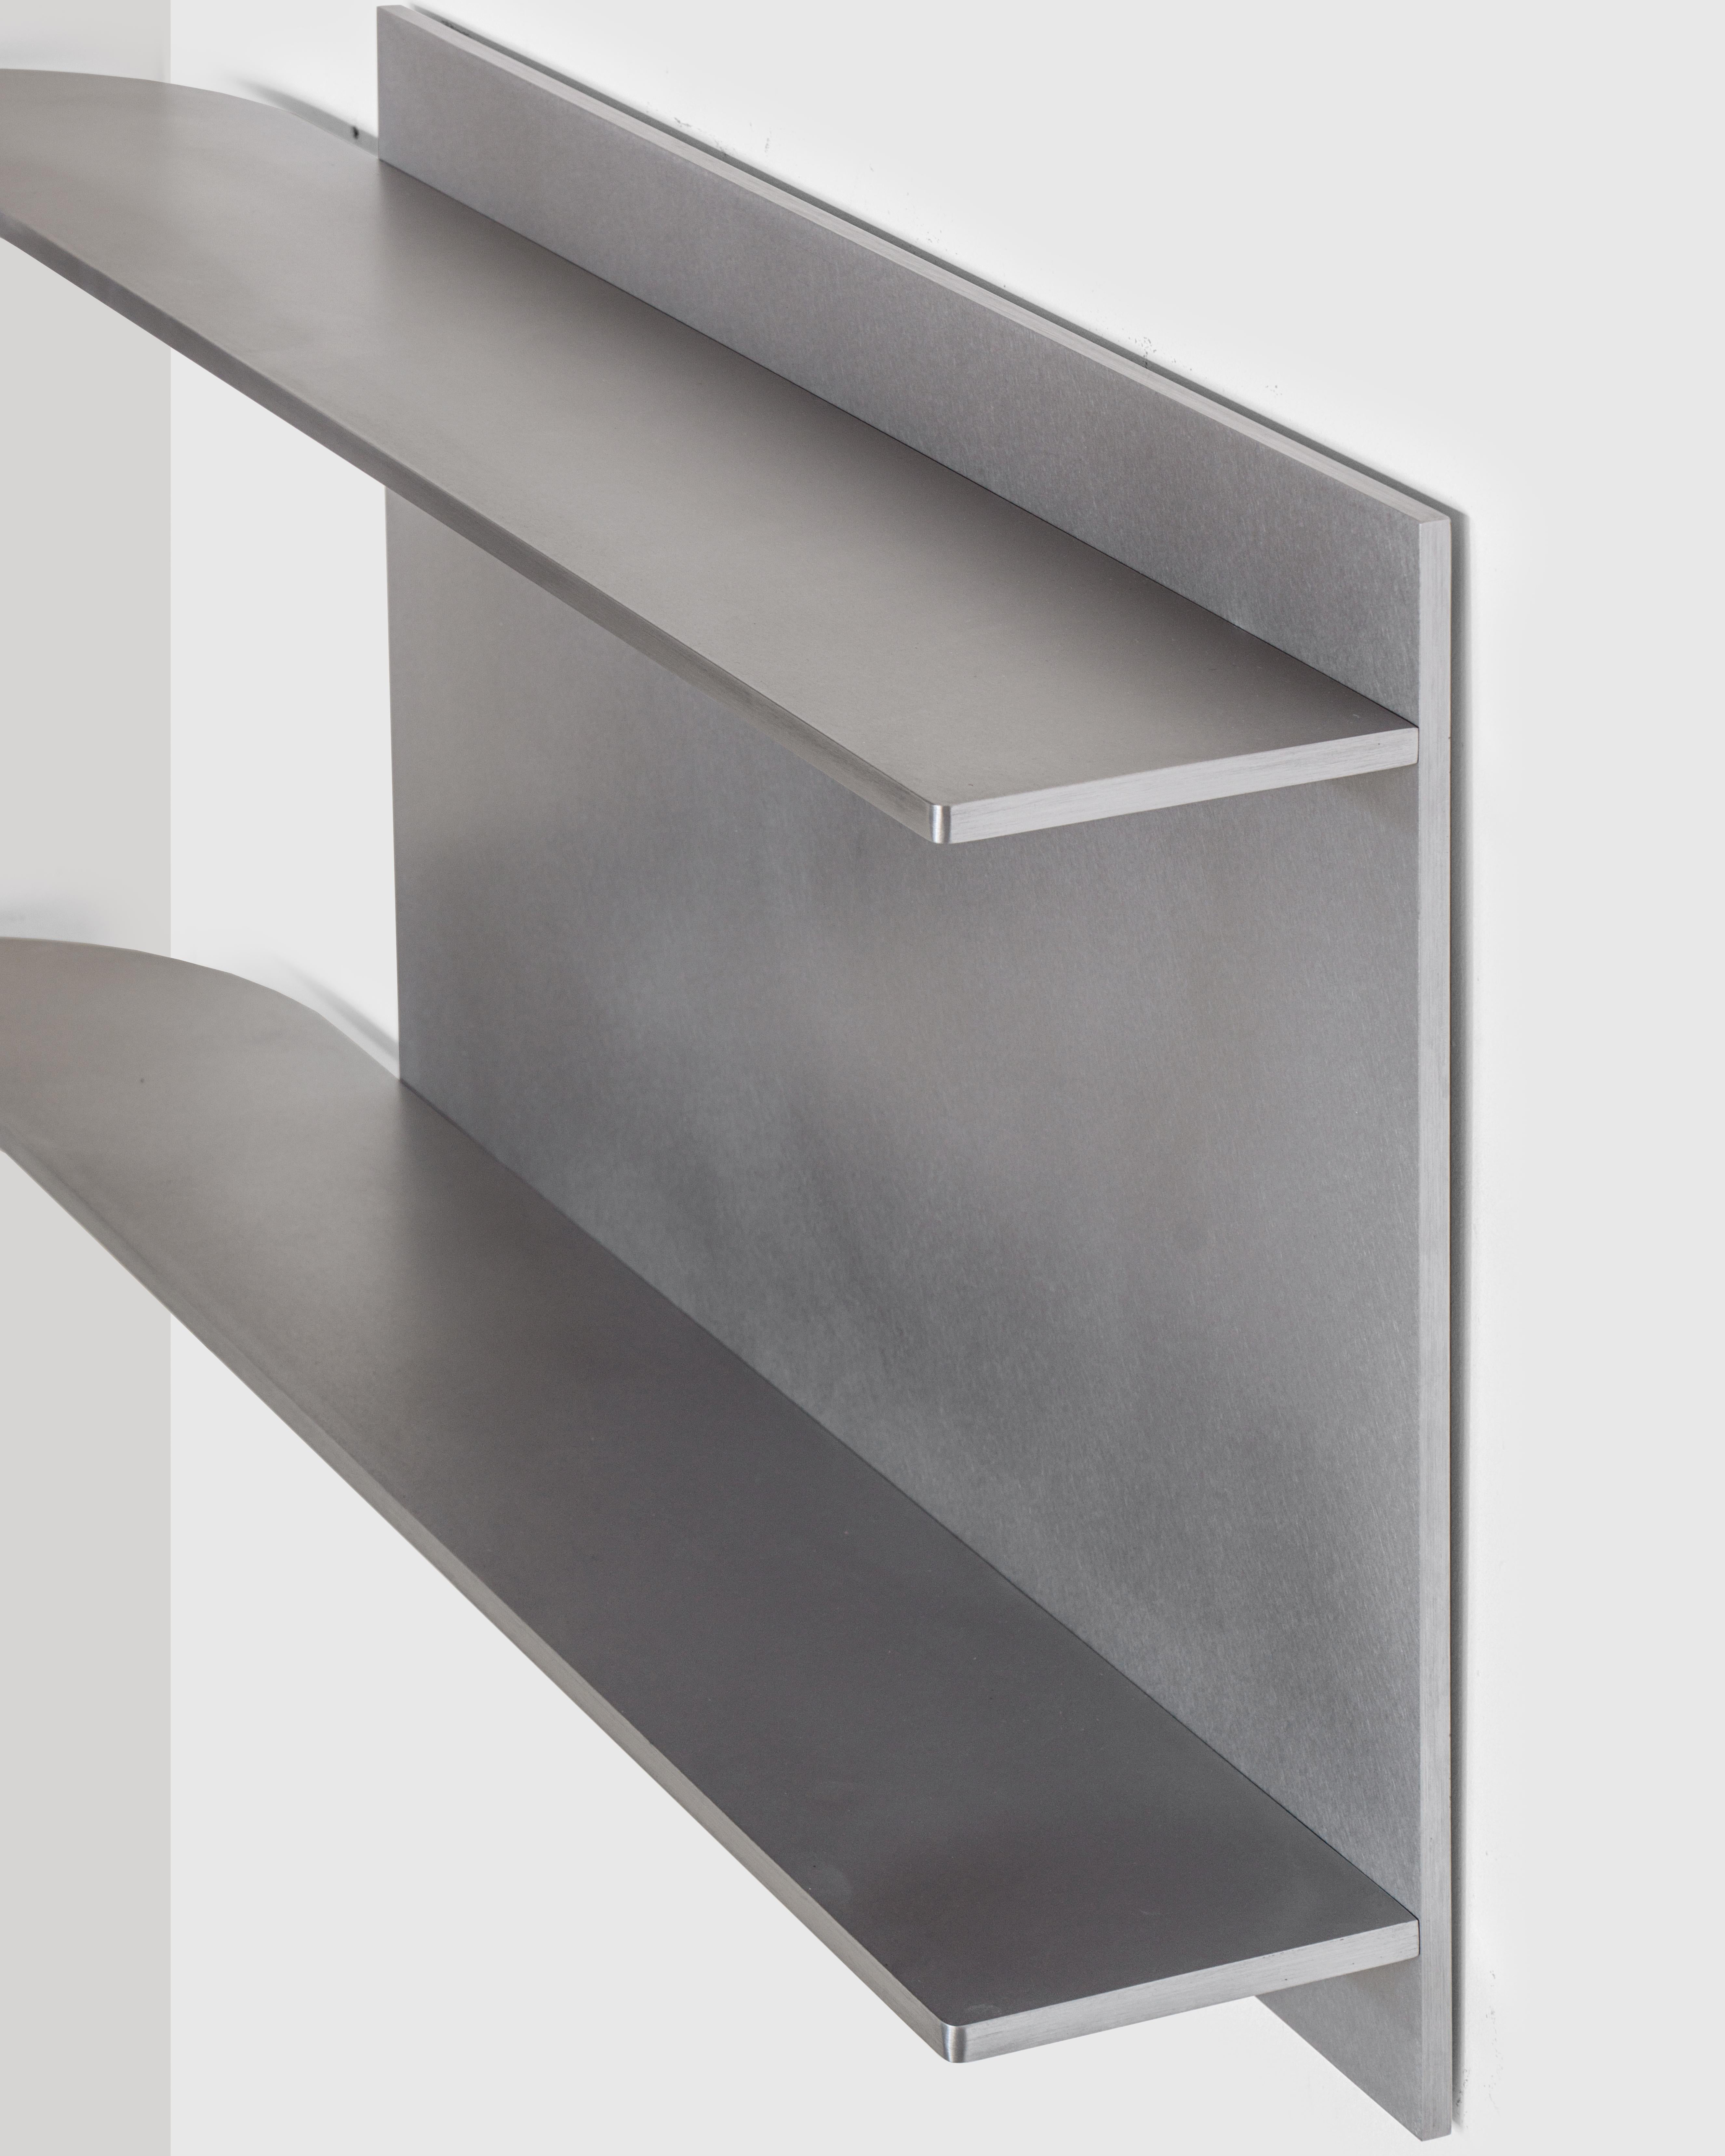 Brushed Angle Shelf in Waxed Aluminium by Johan Viladrich For Sale